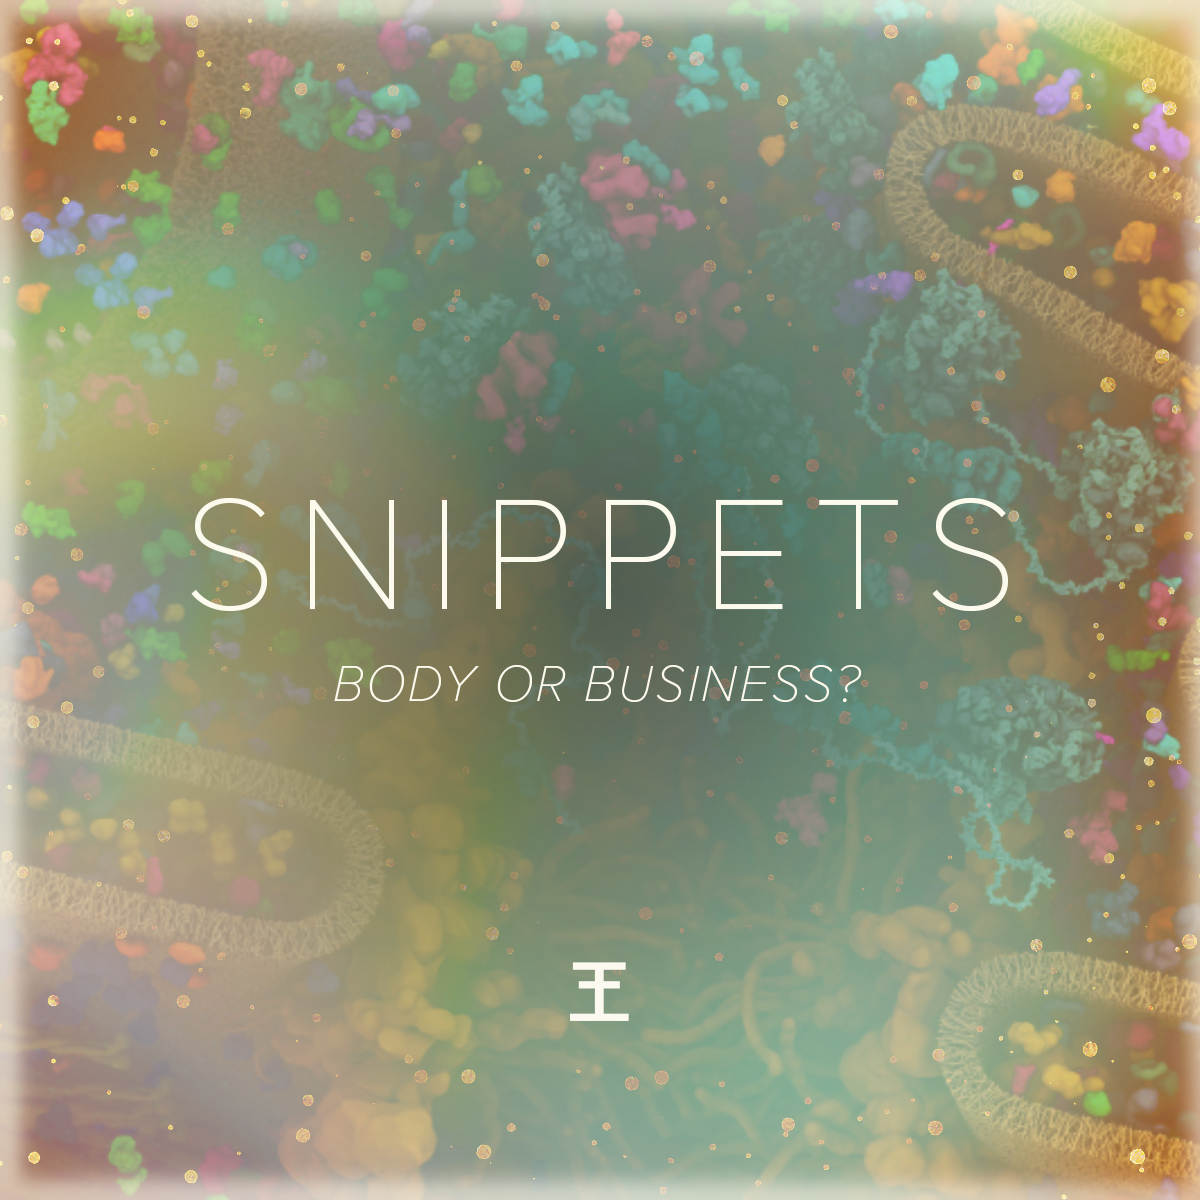 Snippets: Body or Business?